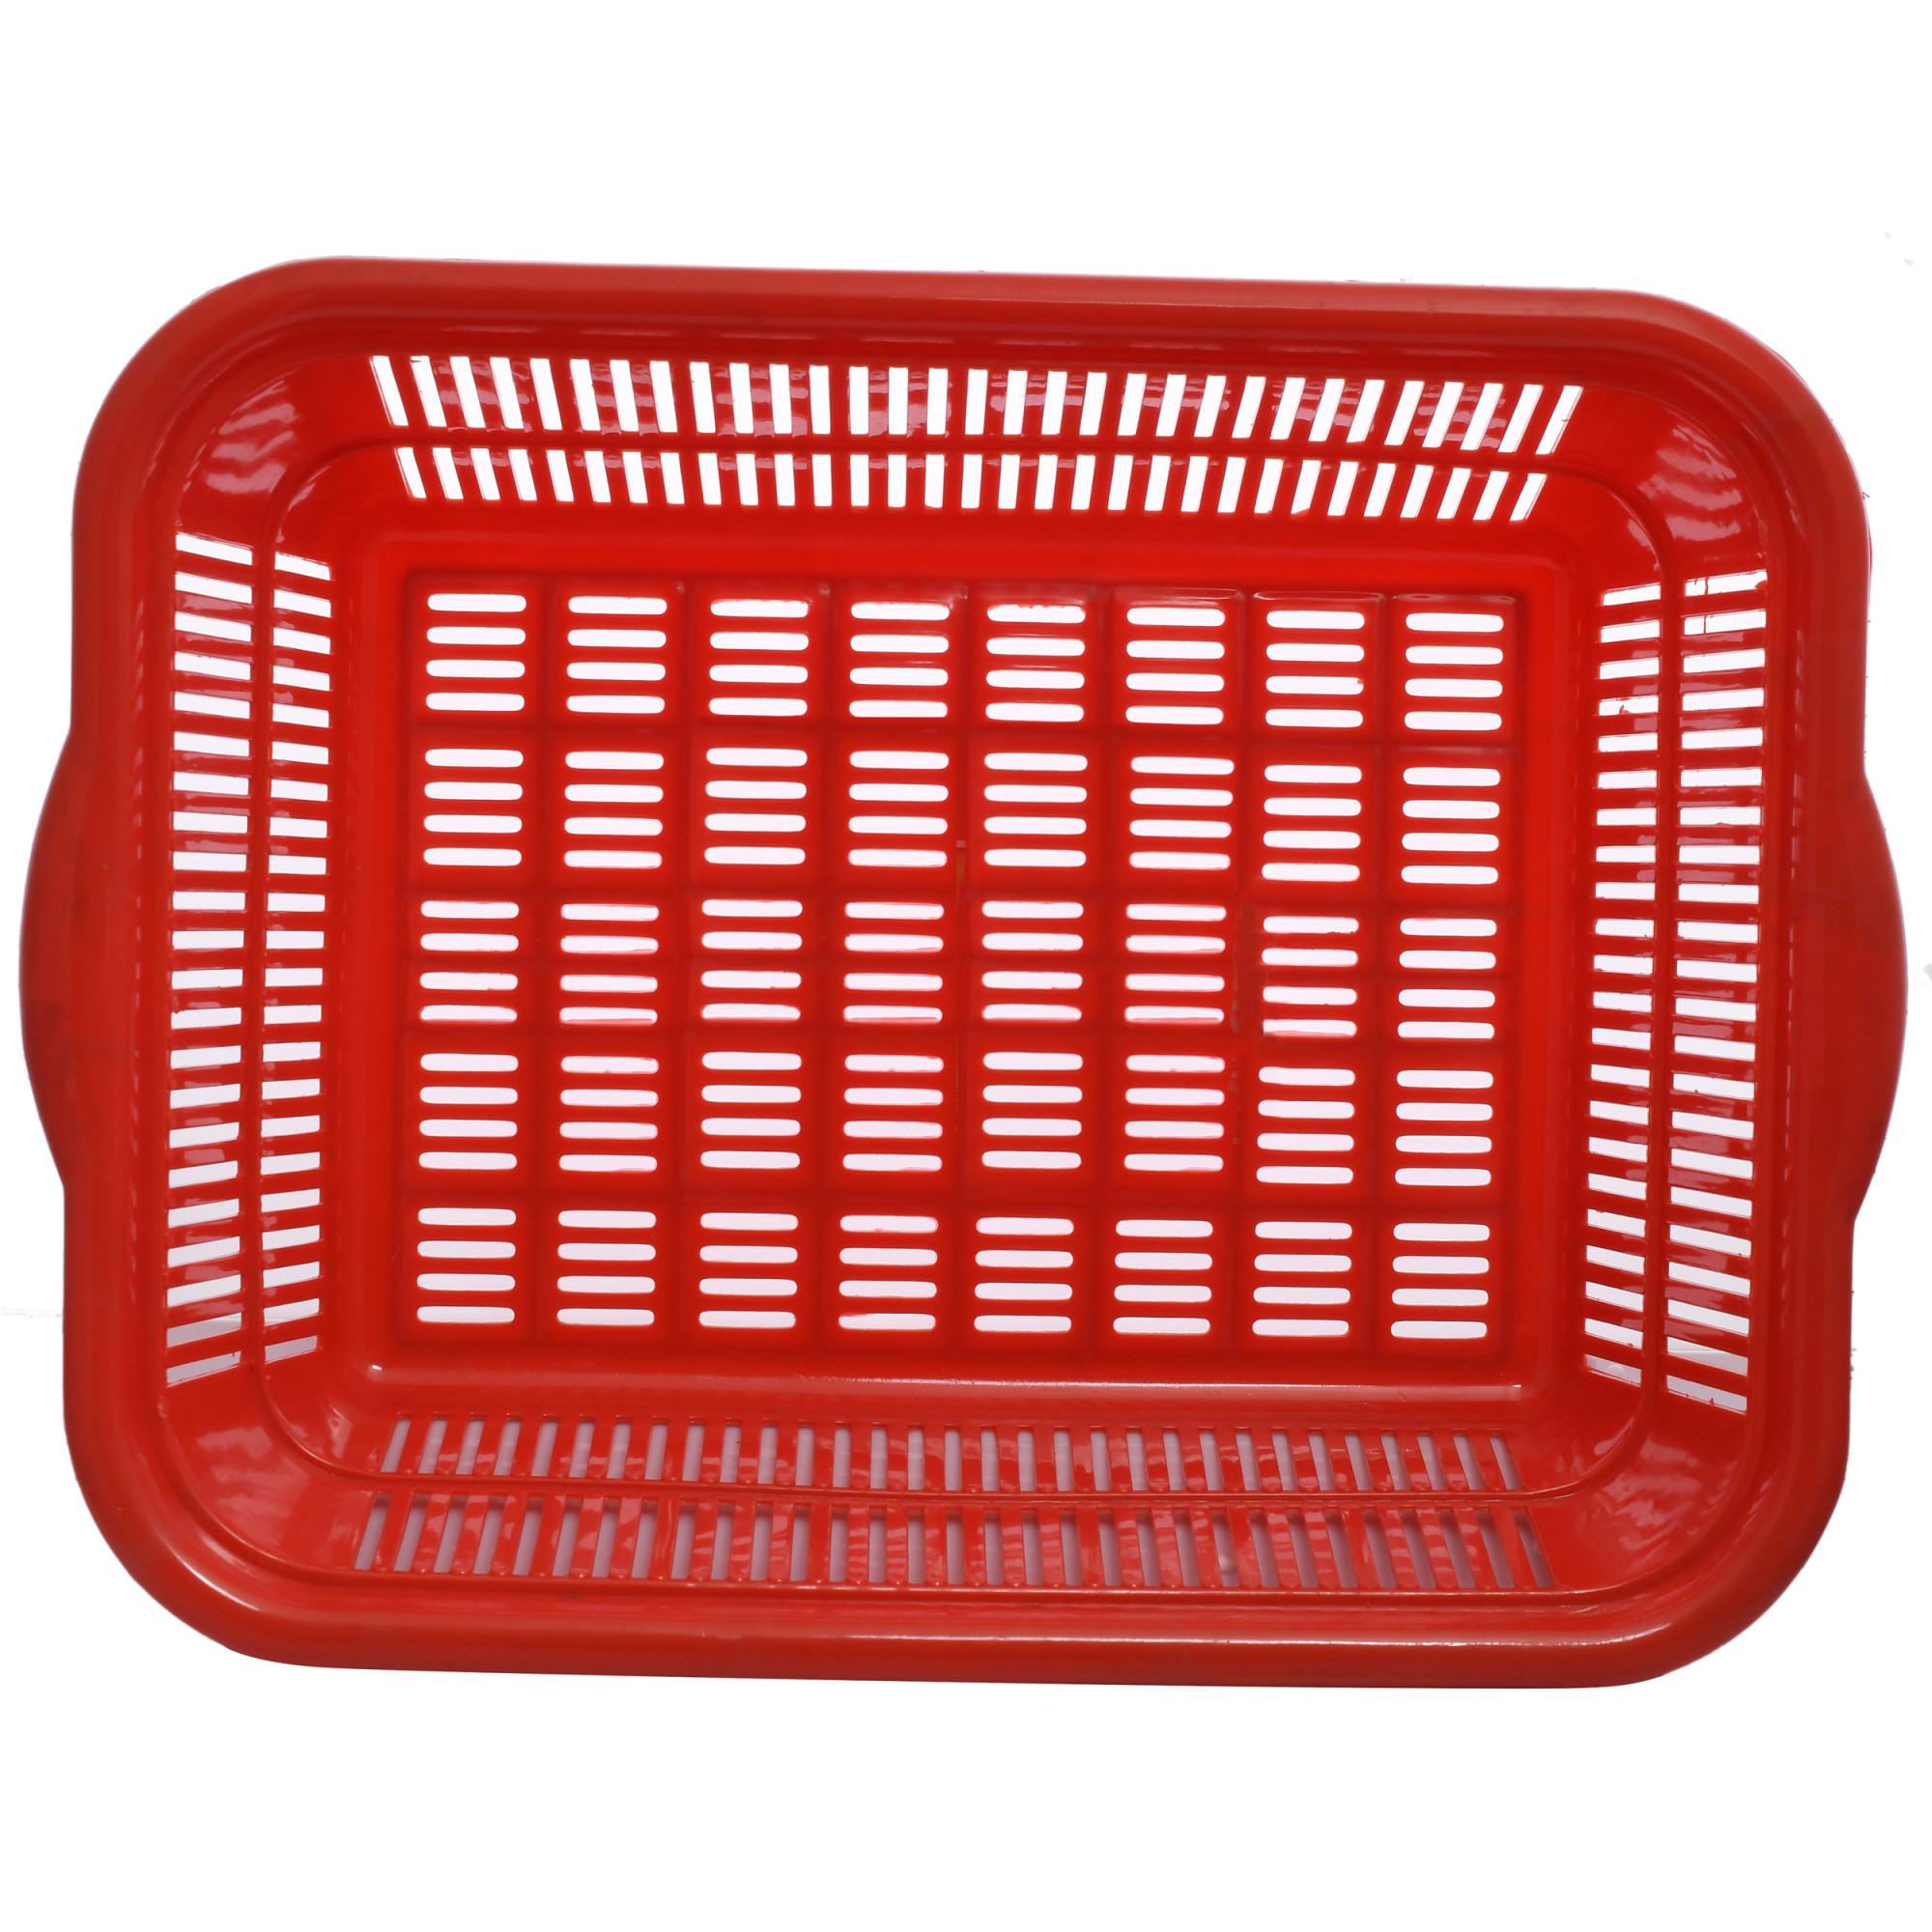 Kuber Industries 4 Pieces Plastic Kitchen Dish Rack Drainer Vegetables And Fruits Basket Dish Rack Multipurpose Organizers ,Small Size,Red